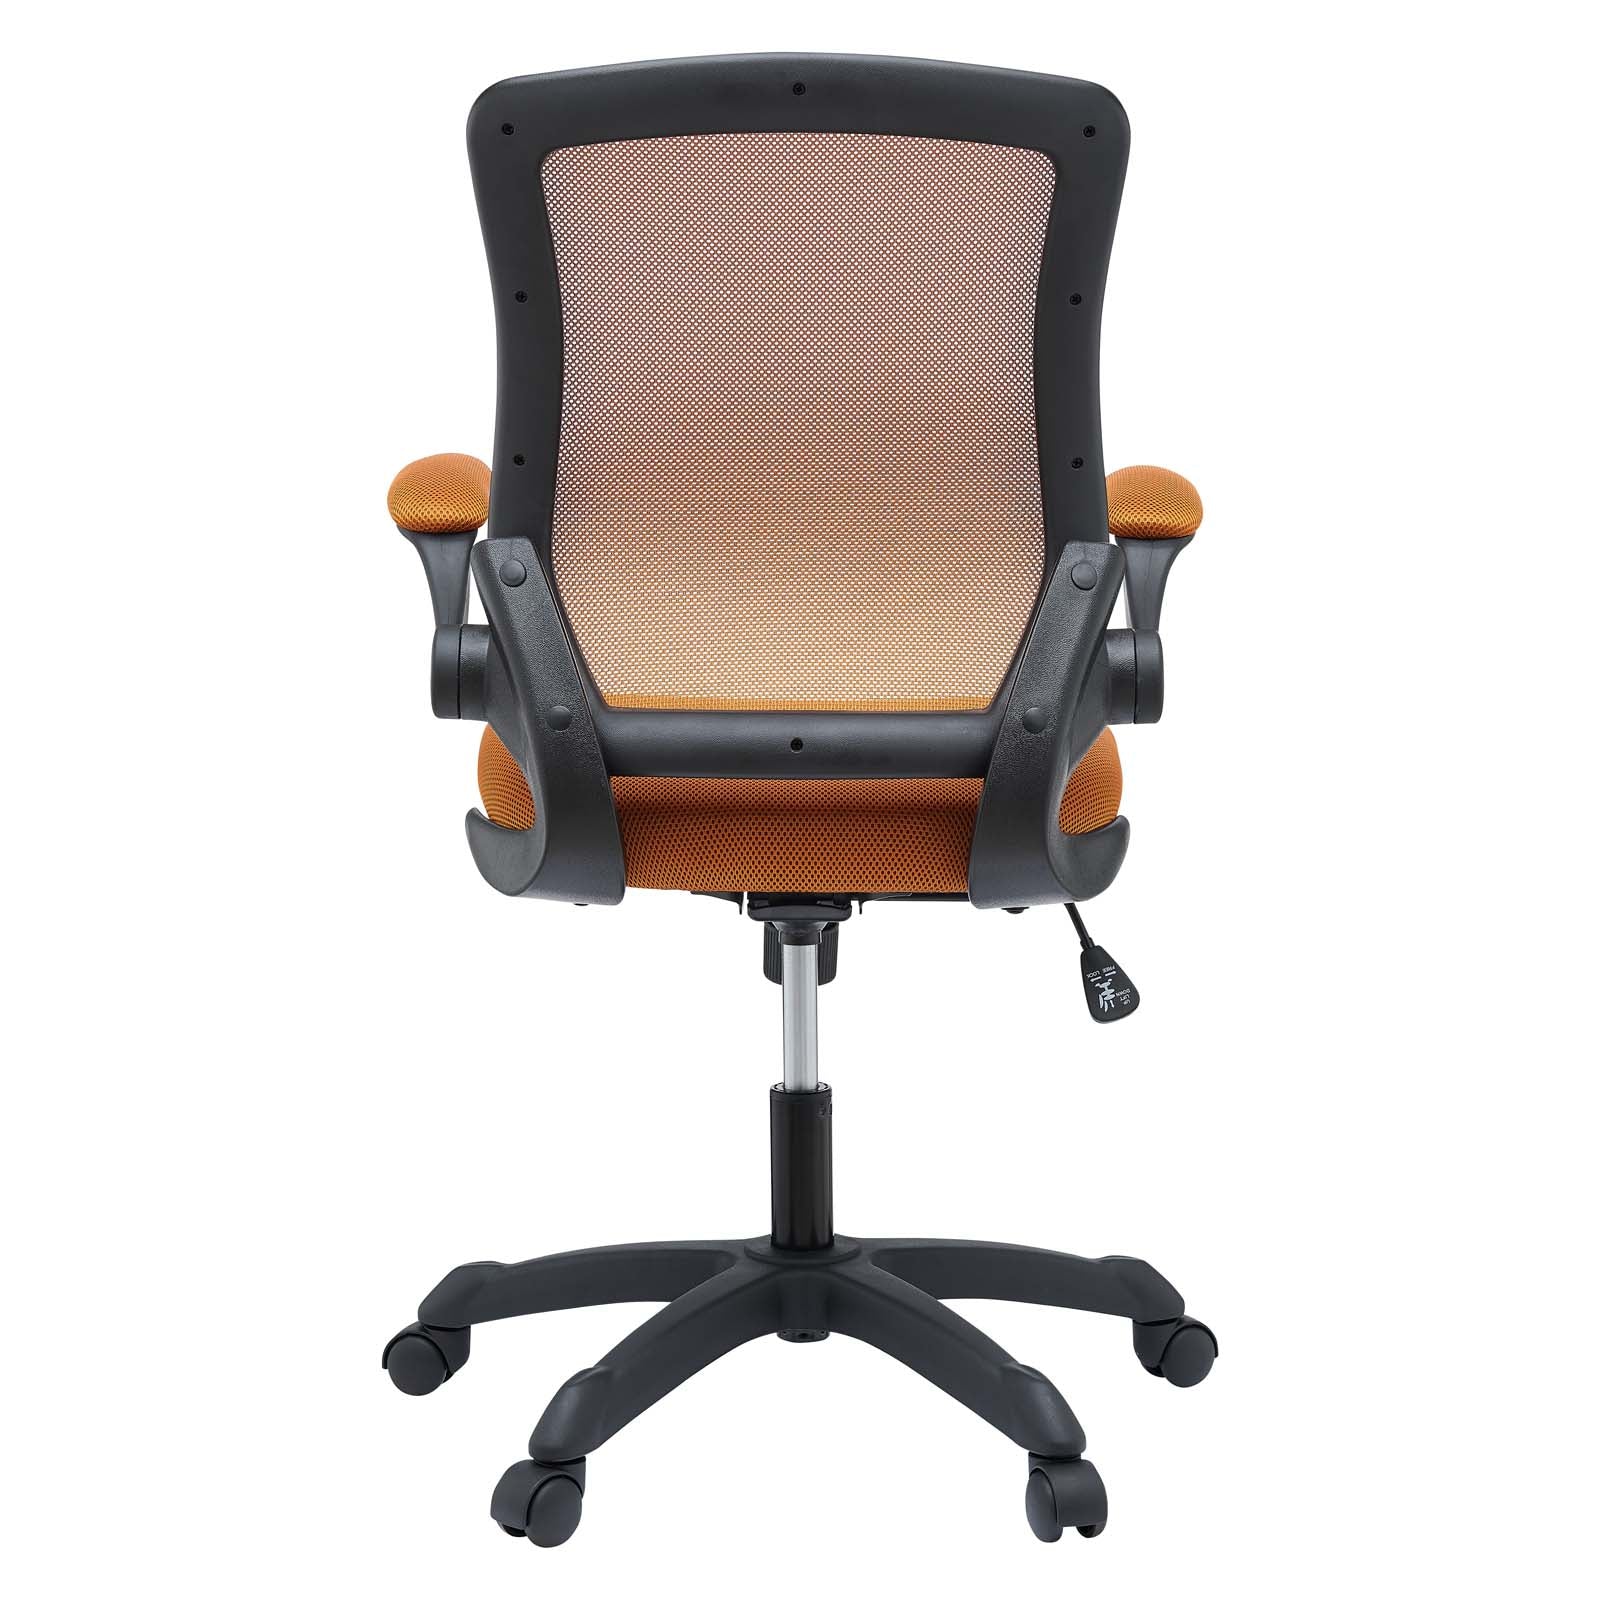 Modway Task Chairs - Veer Mesh Office Chair Tan